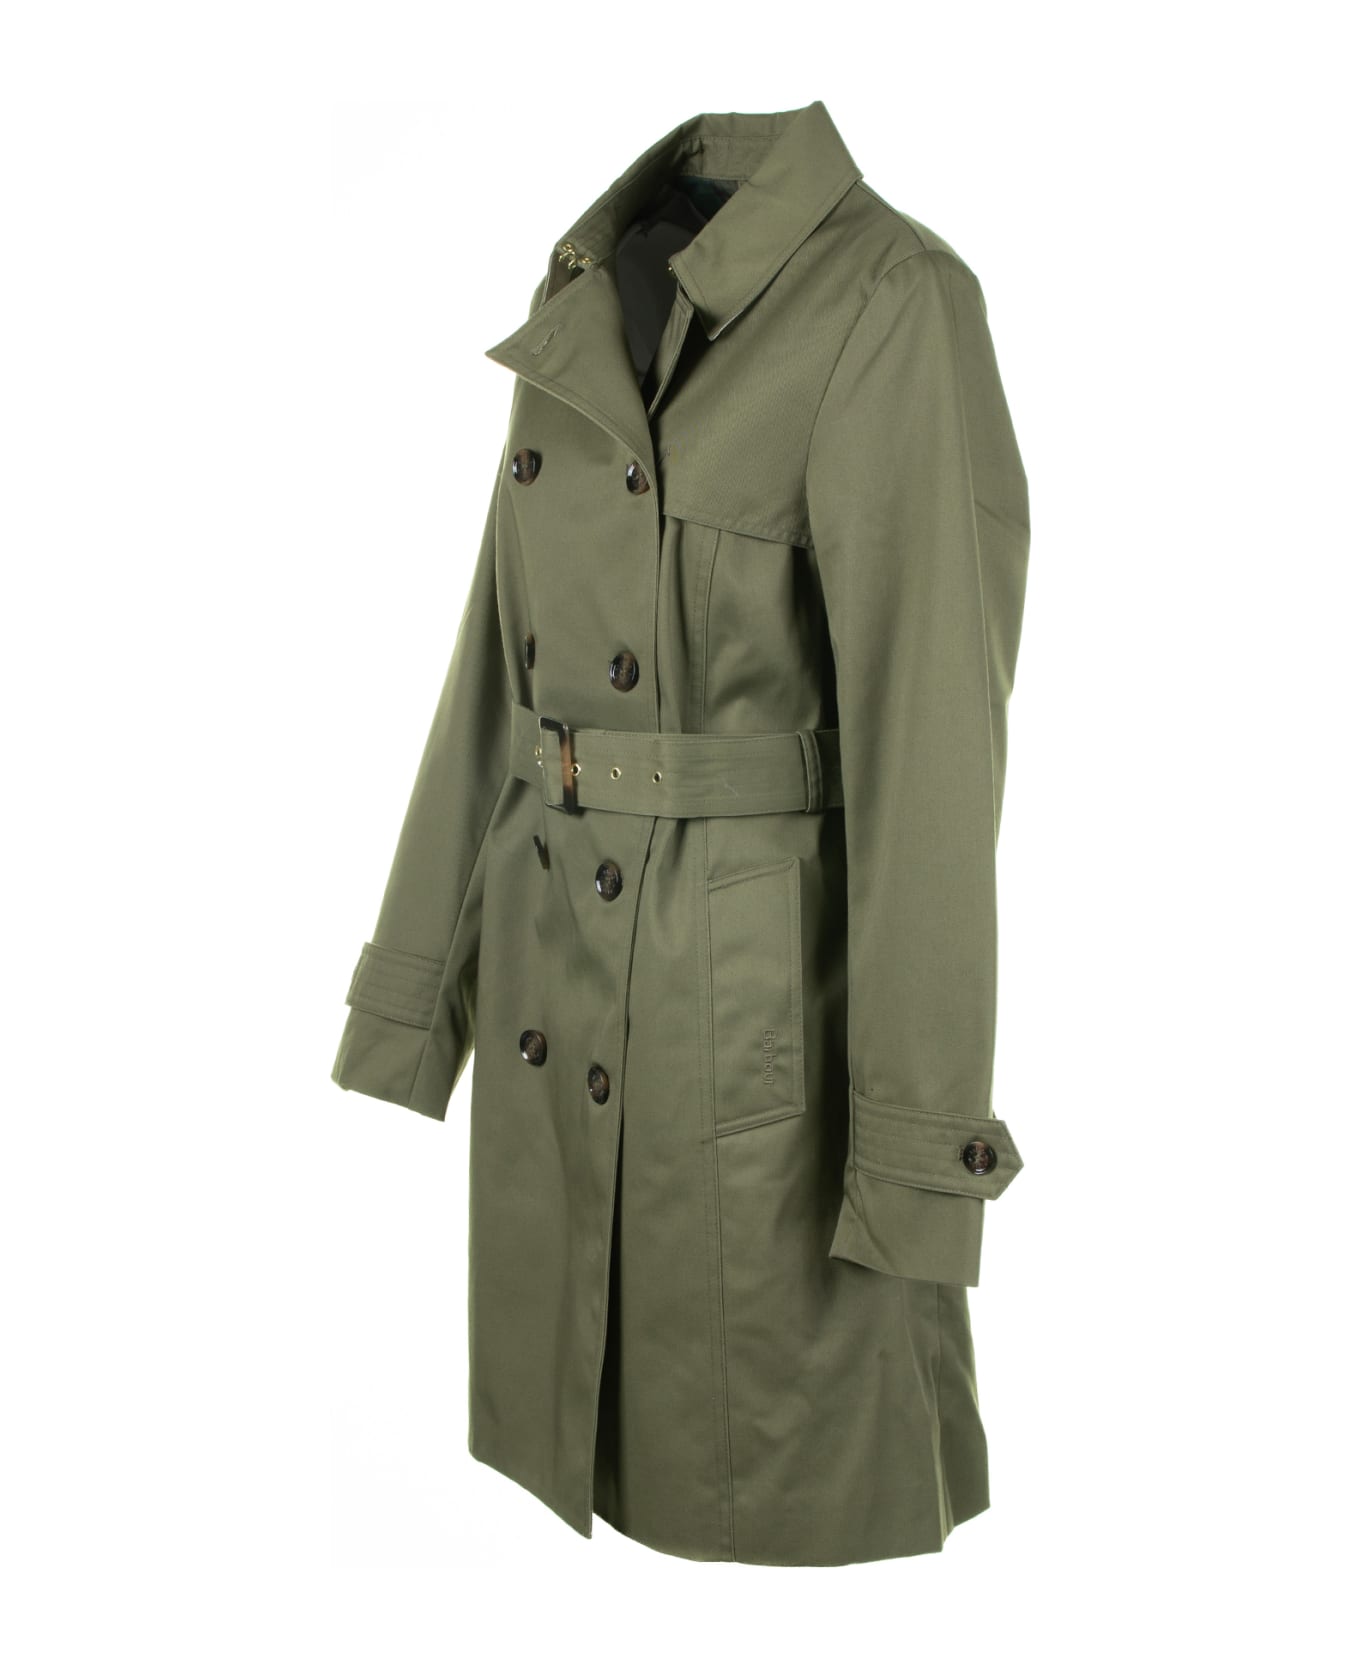 Barbour Green Waterproof Twill Trench Coat - BURNT OLIVE/ANCIENT POLAR レインコート